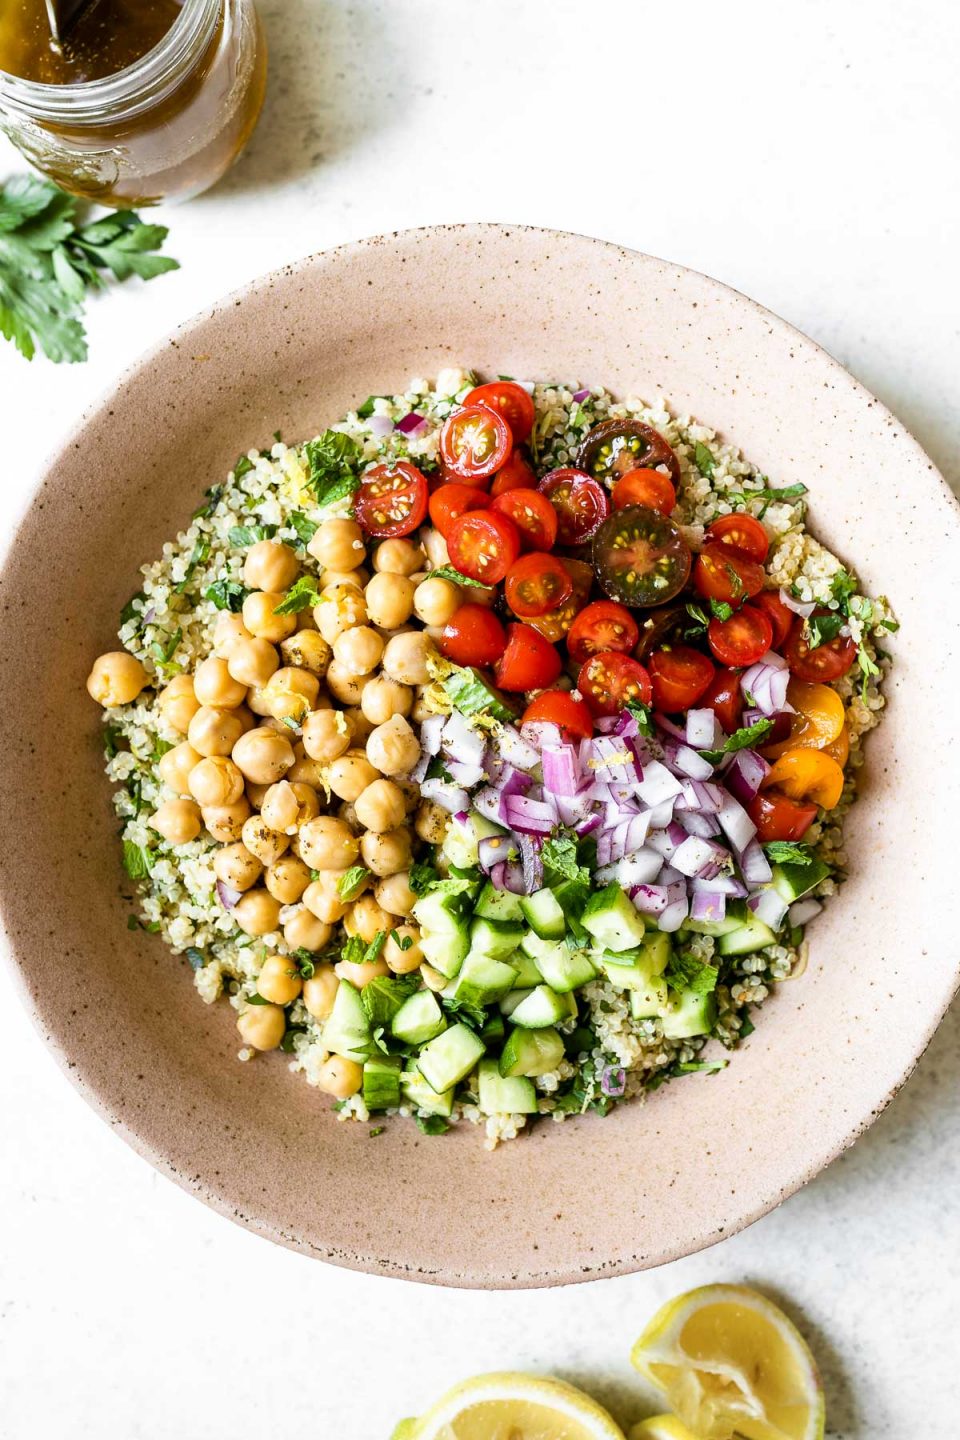 Falafel-ish quinoa salad ingredients layered in groups in a large pink serving dish - quinoa topped with chickpeas, cucumbers, diced red onion & tomatoes.